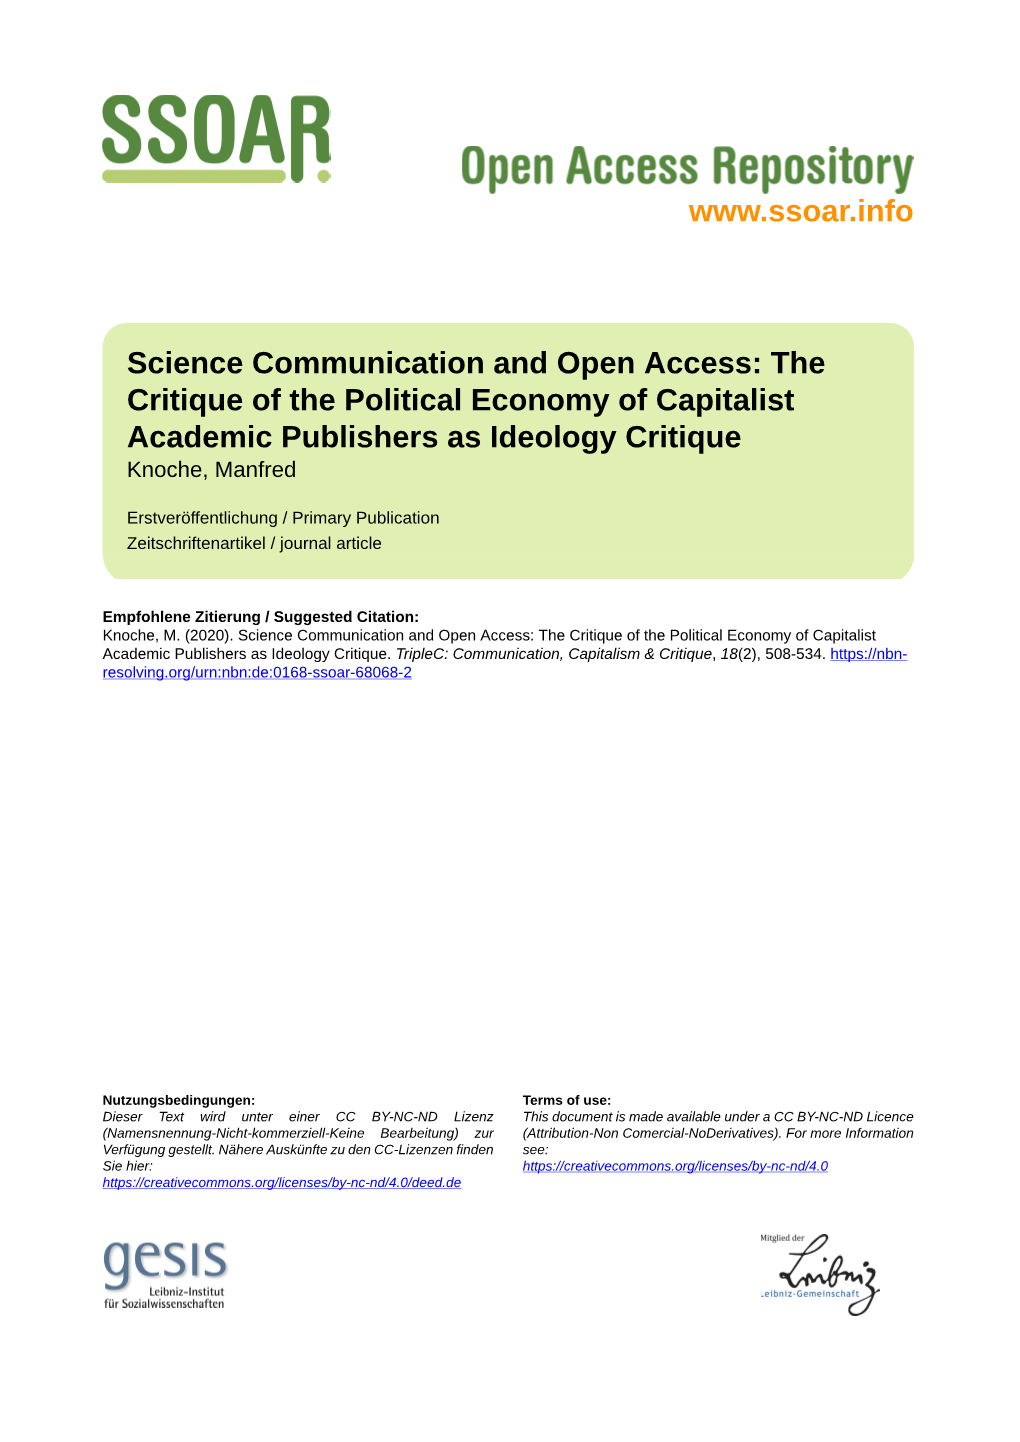 The Critique of the Political Economy of Capitalist Academic Publishers As Ideology Critique Knoche, Manfred